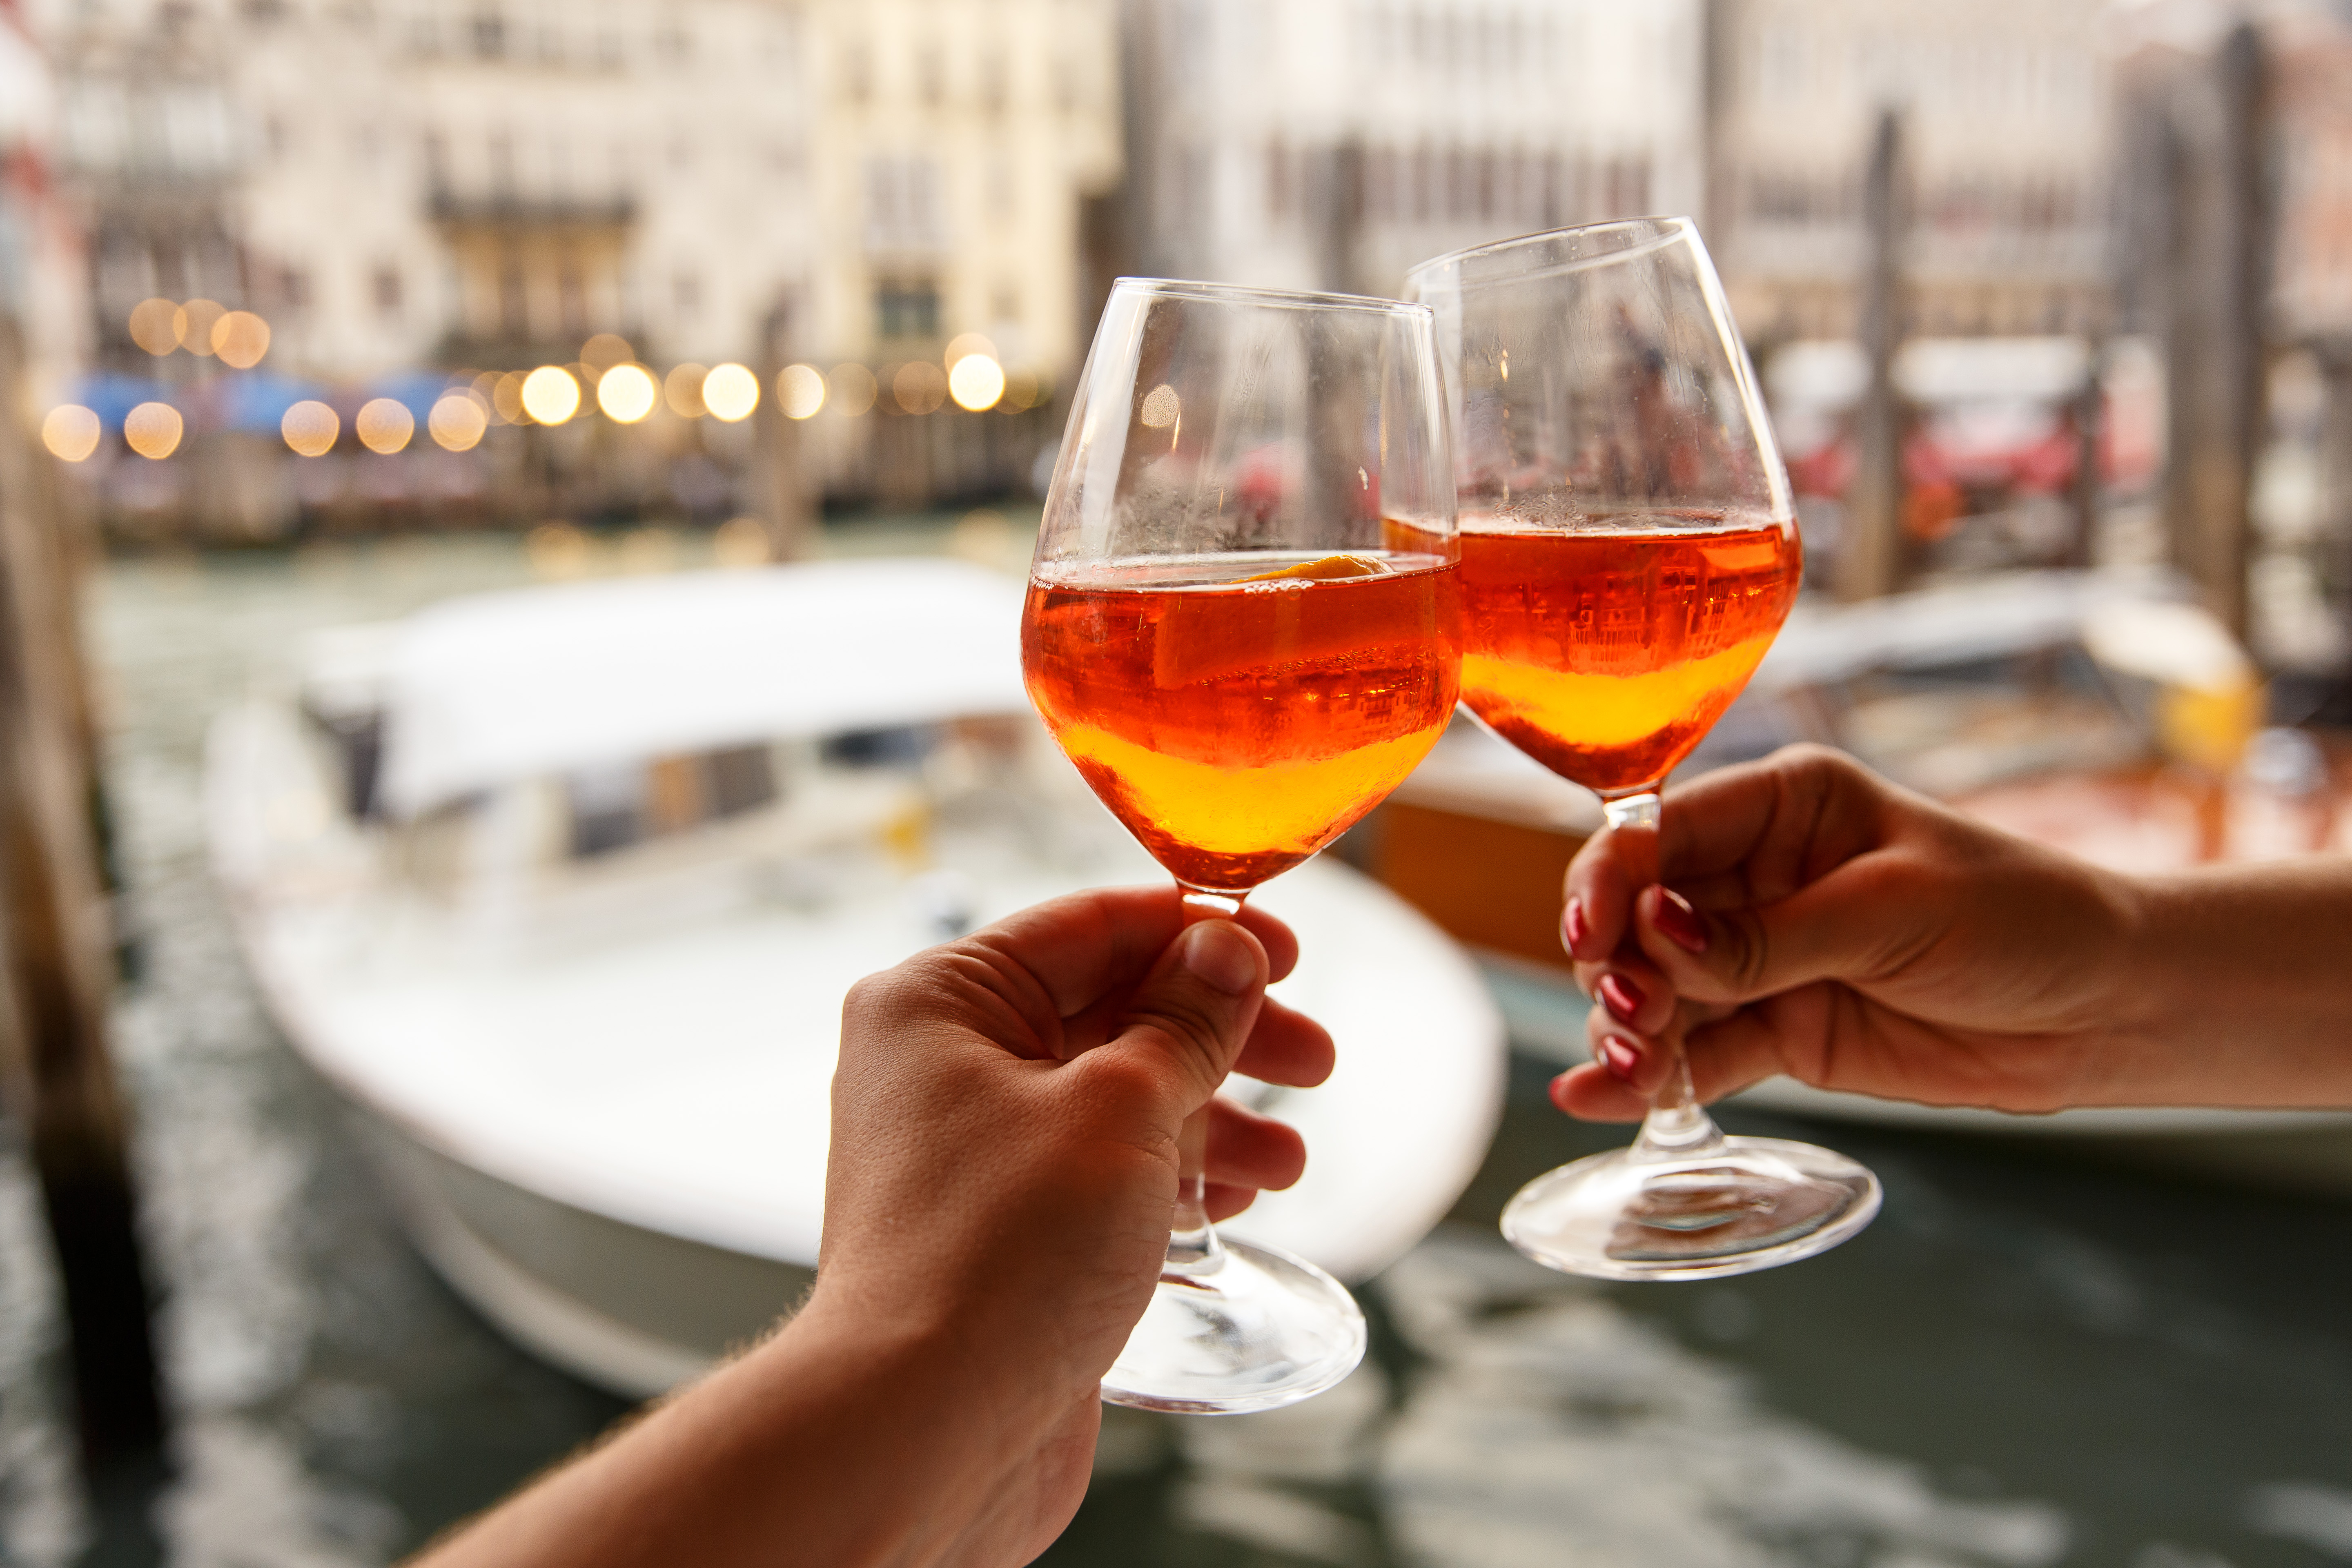 One local told me over a spritz, 'You must remember, Venice doesn’t care for pizza or ice cream'